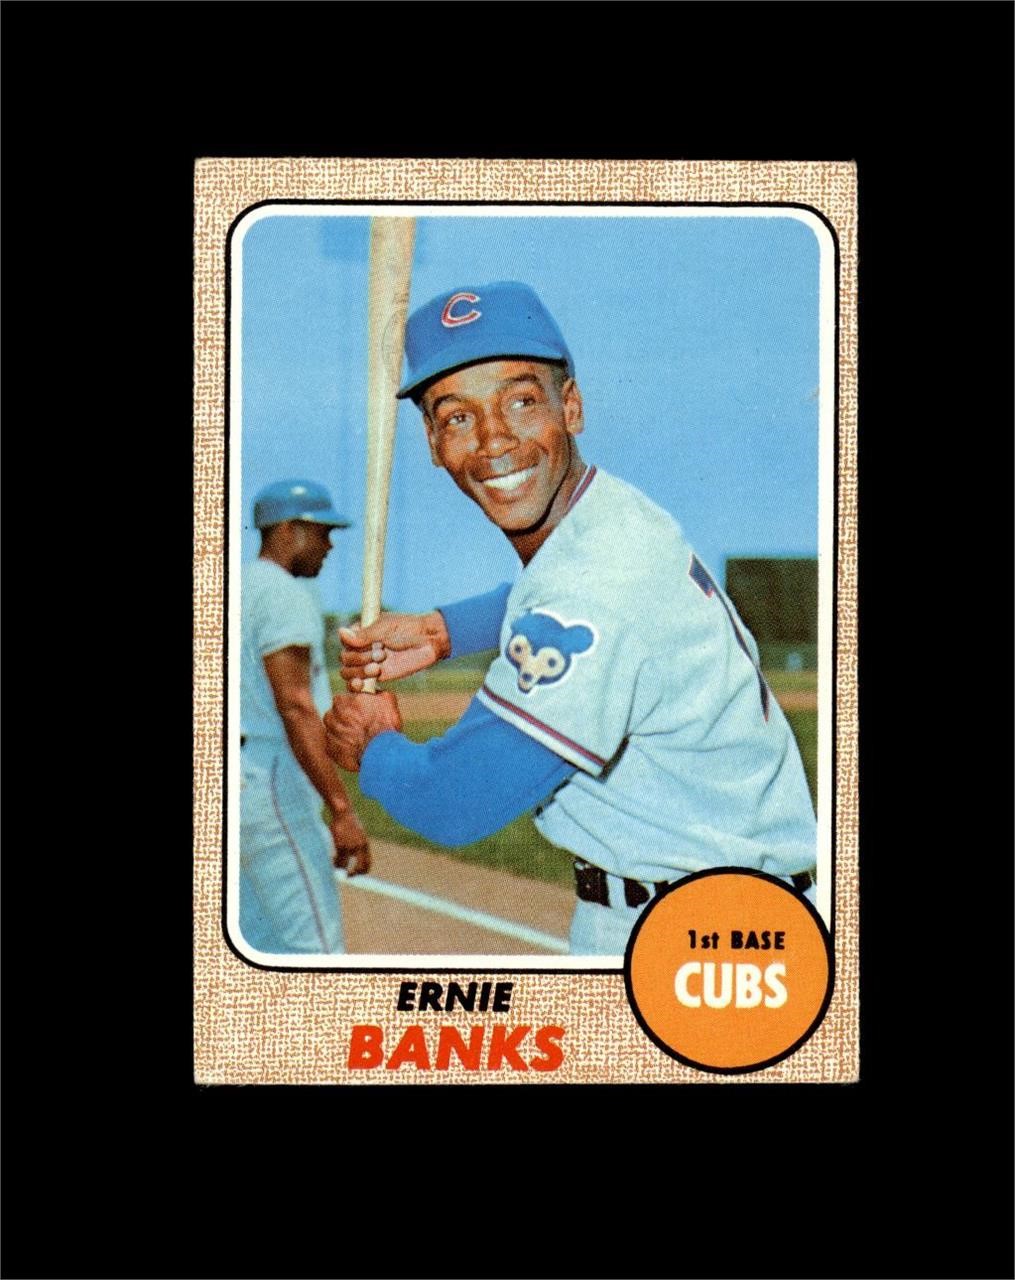 Modern & Vintage Sports Cards - Ends TUE 6/25 9PM CST